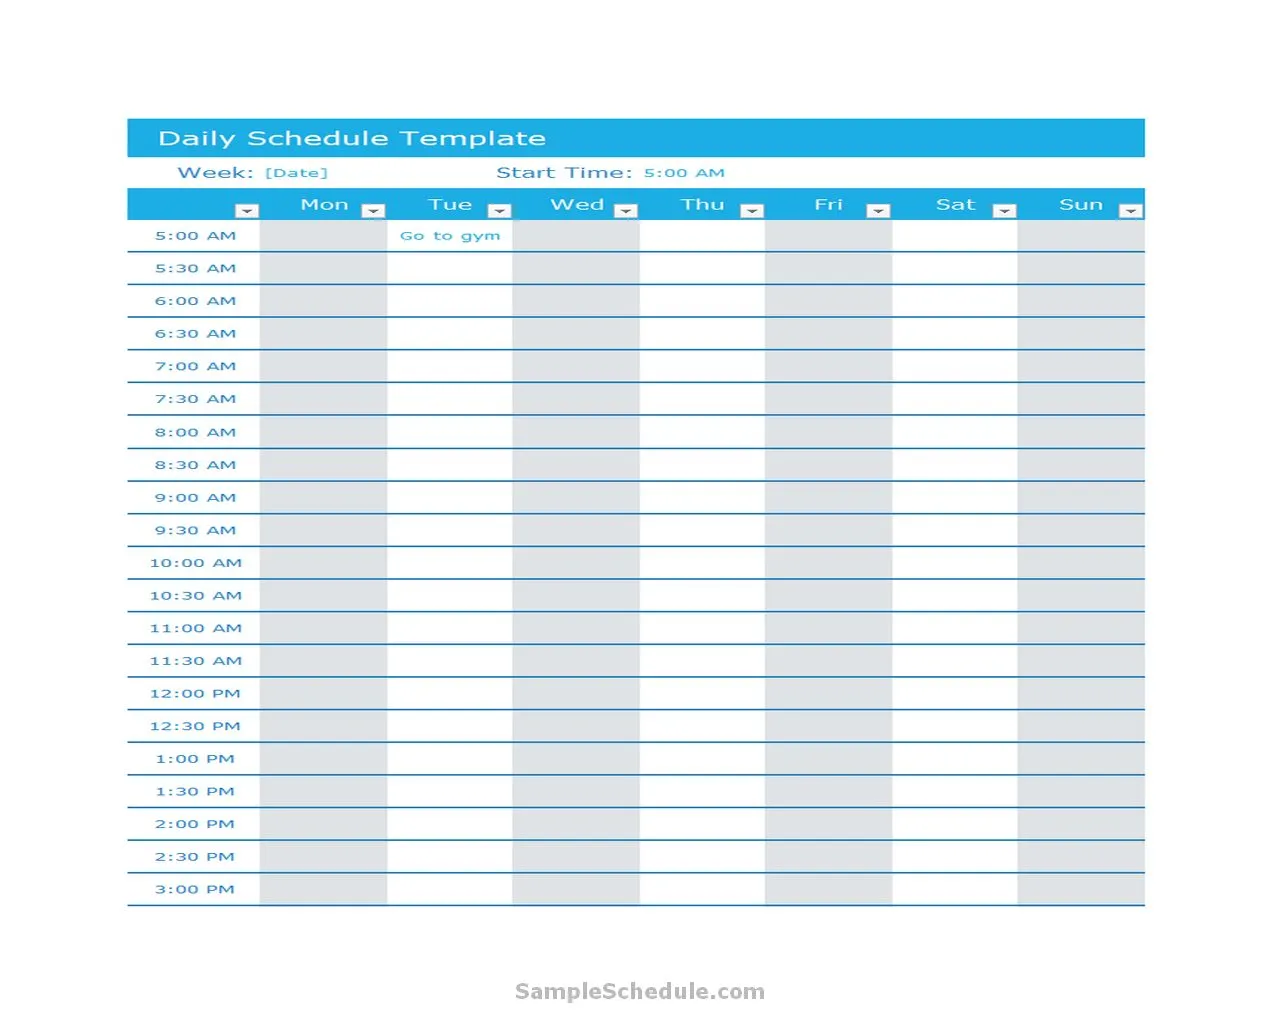 Daily Schedule Template Excel 02